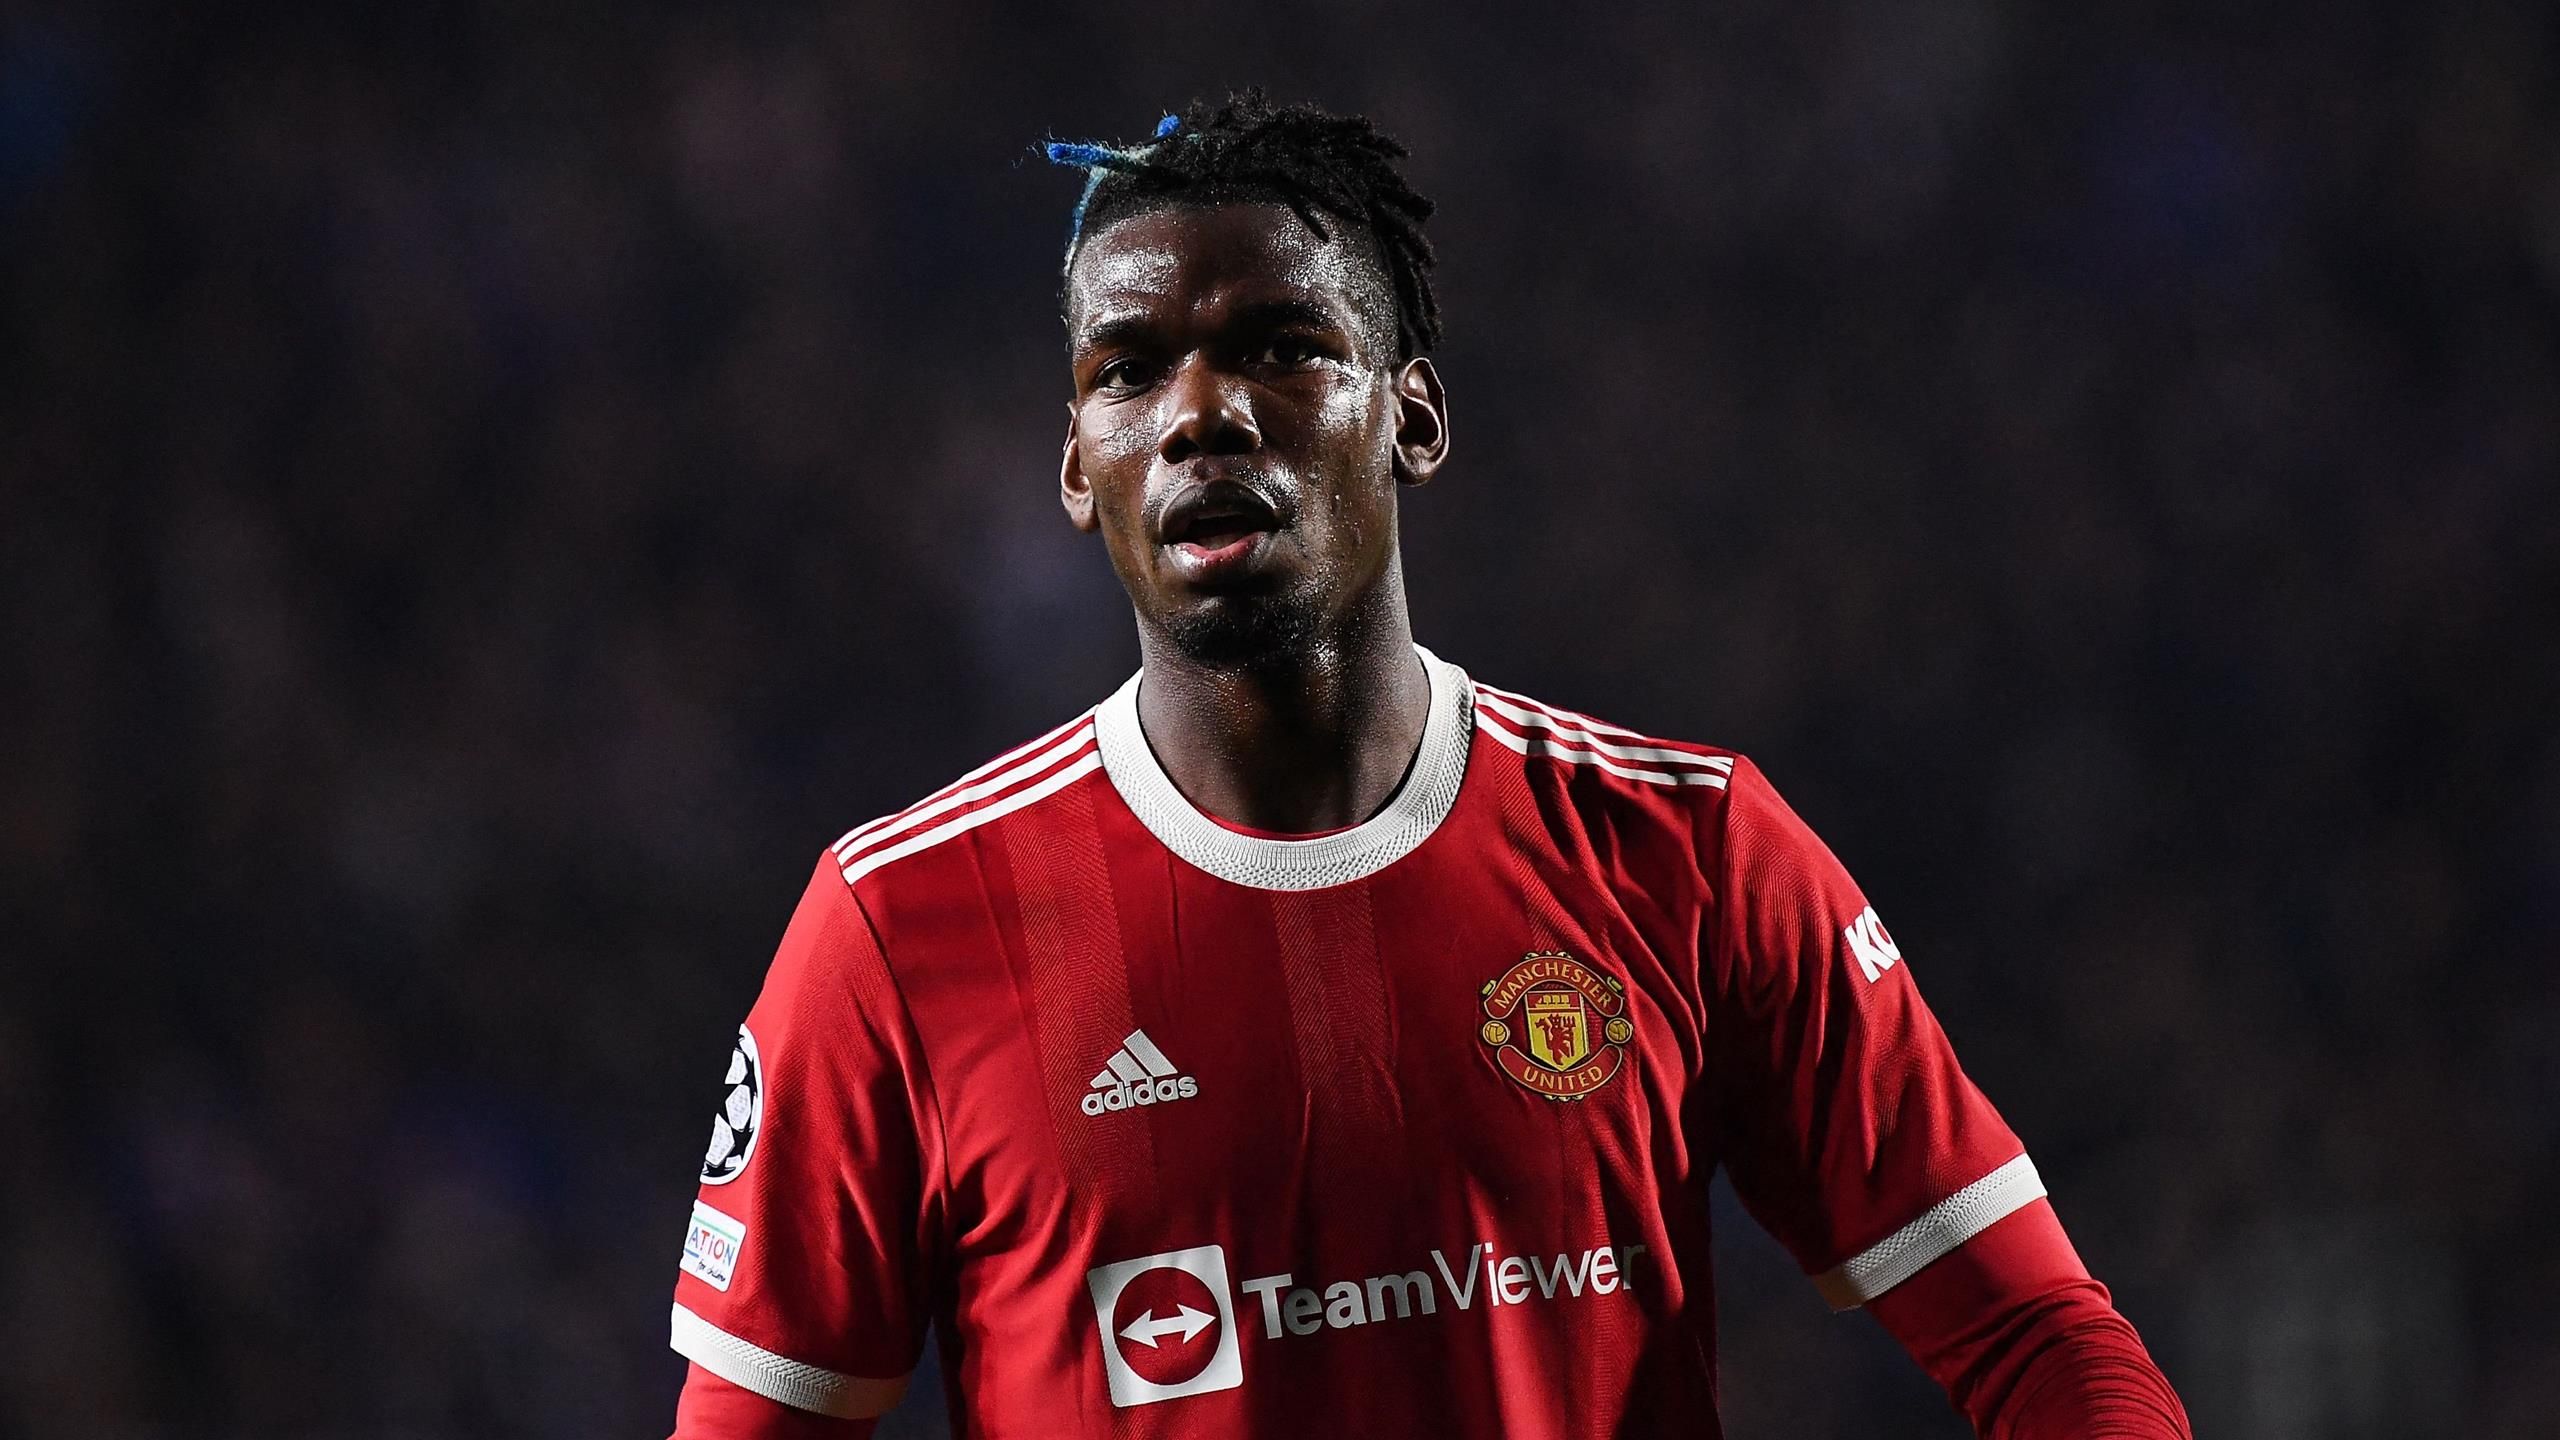 Paul Pogba of Manchester United  Manchester united soccer, Paul pogba  manchester united, Paul pogba